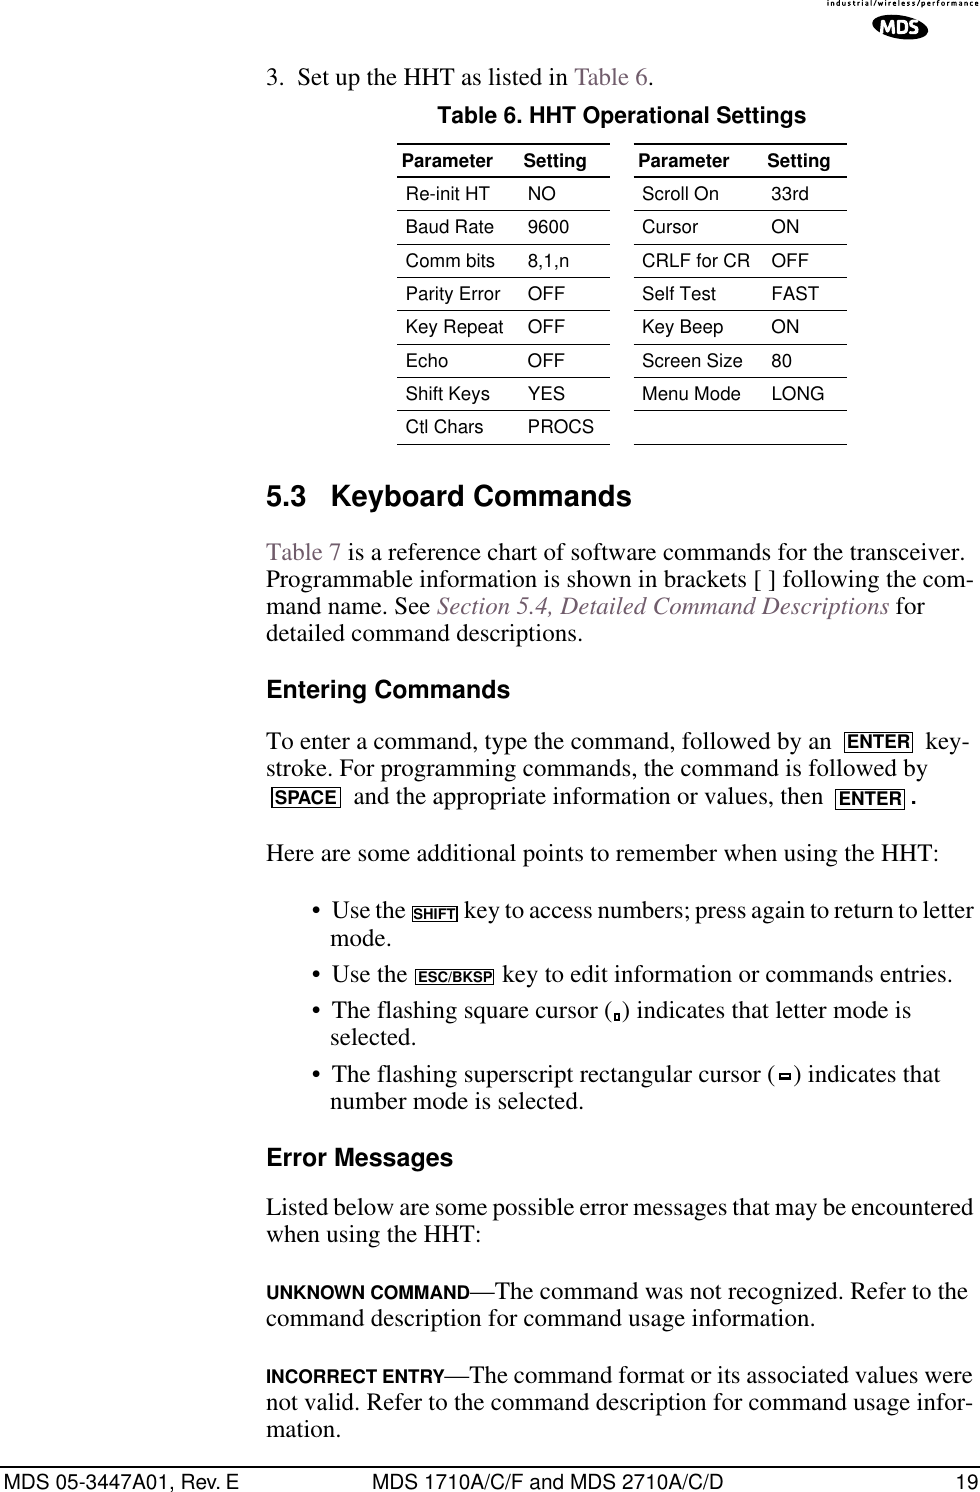 MDS 05-3447A01, Rev. E MDS 1710A/C/F and MDS 2710A/C/D 193. Set up the HHT as listed in Table 6.5.3 Keyboard CommandsTable 7 is a reference chart of software commands for the transceiver. Programmable information is shown in brackets [ ] following the com-mand name. See Section 5.4, Detailed Command Descriptions for detailed command descriptions.Entering CommandsTo enter a command, type the command, followed by an   key-stroke. For programming commands, the command is followed by  and the appropriate information or values, then  .Here are some additional points to remember when using the HHT:• Use the   key to access numbers; press again to return to letter mode.• Use the   key to edit information or commands entries.• The flashing square cursor ( ) indicates that letter mode is selected.• The flashing superscript rectangular cursor ( ) indicates that number mode is selected.Error MessagesListed below are some possible error messages that may be encountered when using the HHT:UNKNOWN COMMAND—The command was not recognized. Refer to the command description for command usage information.INCORRECT ENTRY—The command format or its associated values were not valid. Refer to the command description for command usage infor-mation.Table 6. HHT Operational Settings  Parameter Setting Parameter SettingRe-init HT NO Scroll On 33rdBaud Rate 9600 Cursor ONComm bits 8,1,n CRLF for CR OFFParity Error OFF Self Test FASTKey Repeat OFF Key Beep ONEcho OFF Screen Size 80Shift Keys  YES Menu Mode LONGCtl Chars PROCSENTERSPACE ENTERSHIFTESC/BKSP